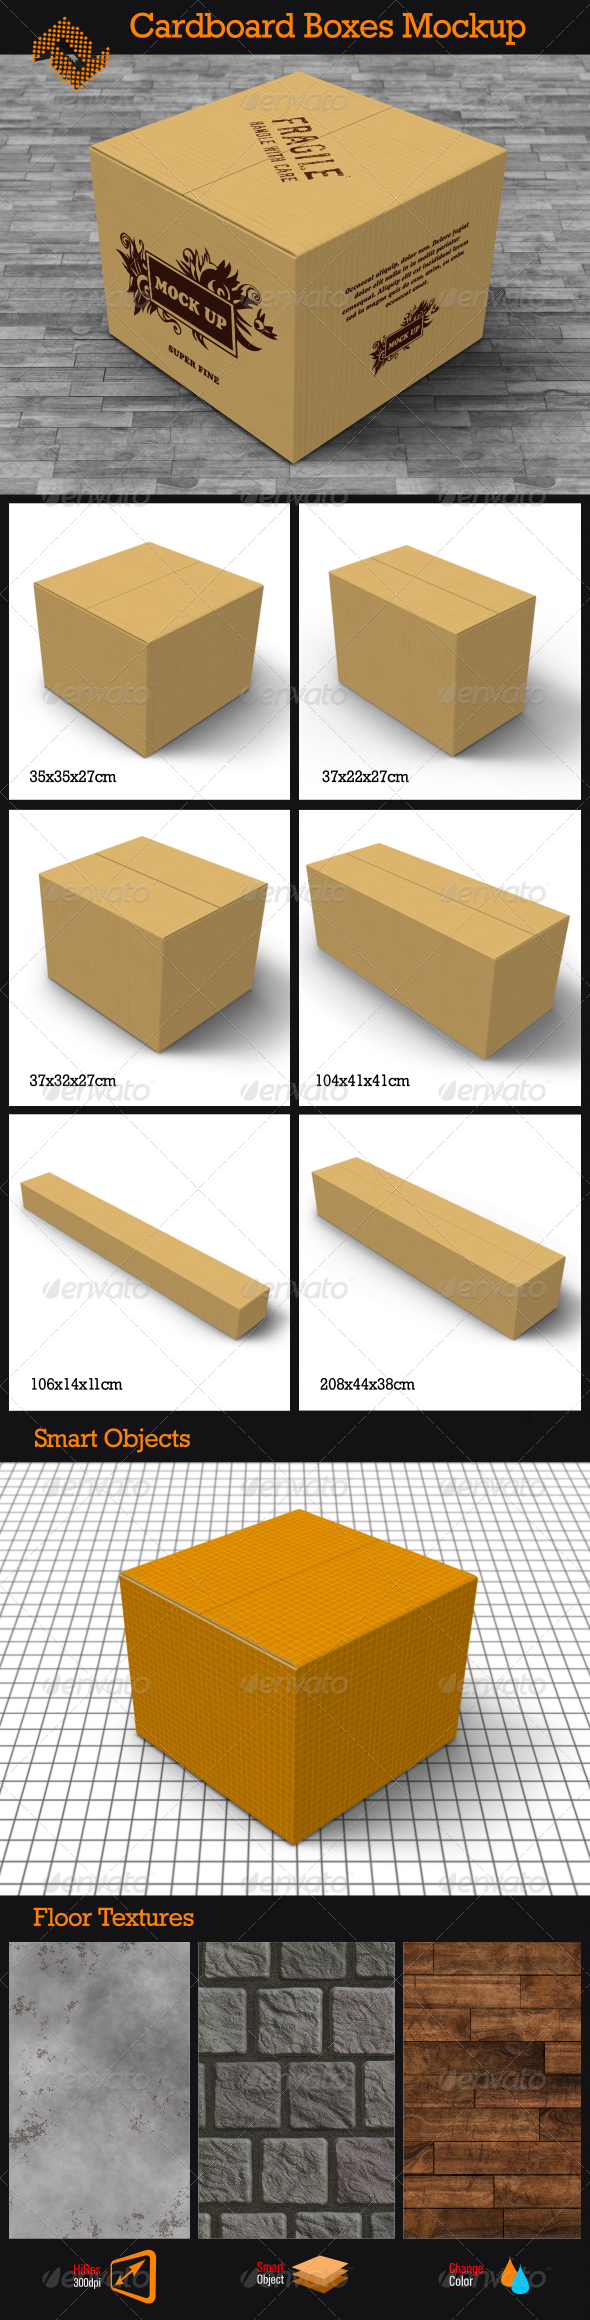 Download 6 Cardboard Boxes Mockup By Fusionhorn Graphicriver PSD Mockup Templates